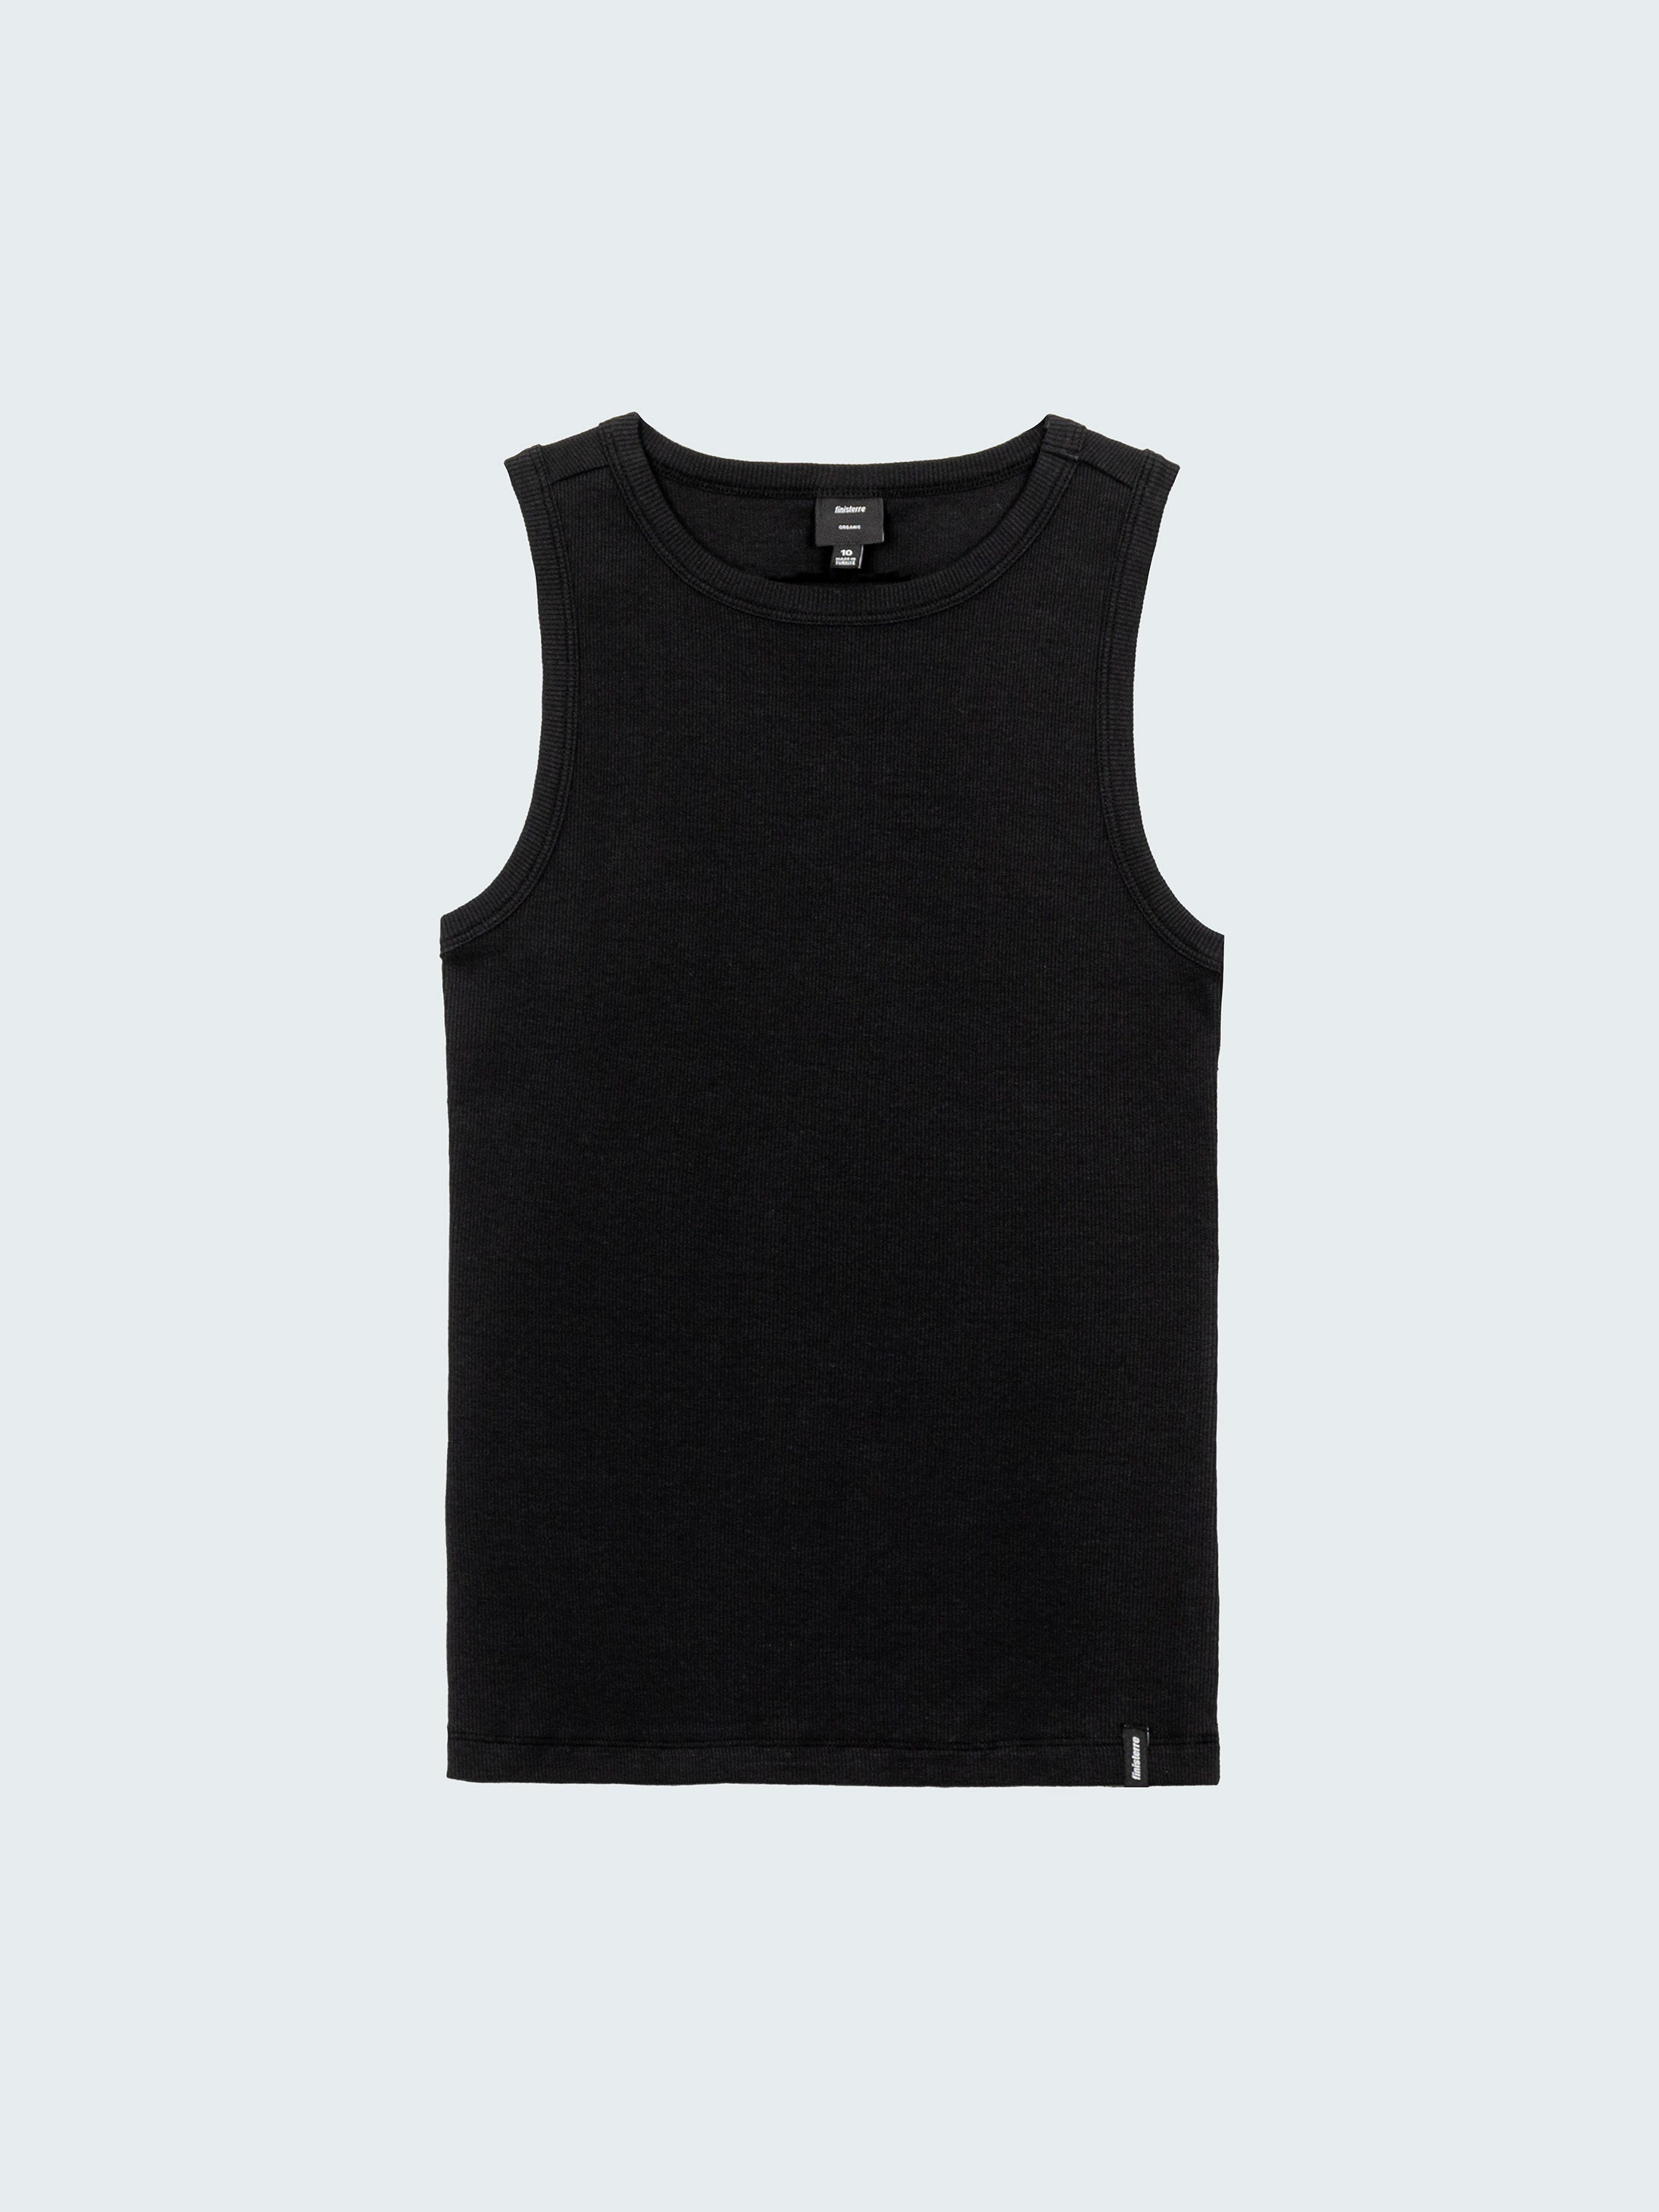 Women's Organic Black Ribbed Vest - Powes | Finisterre